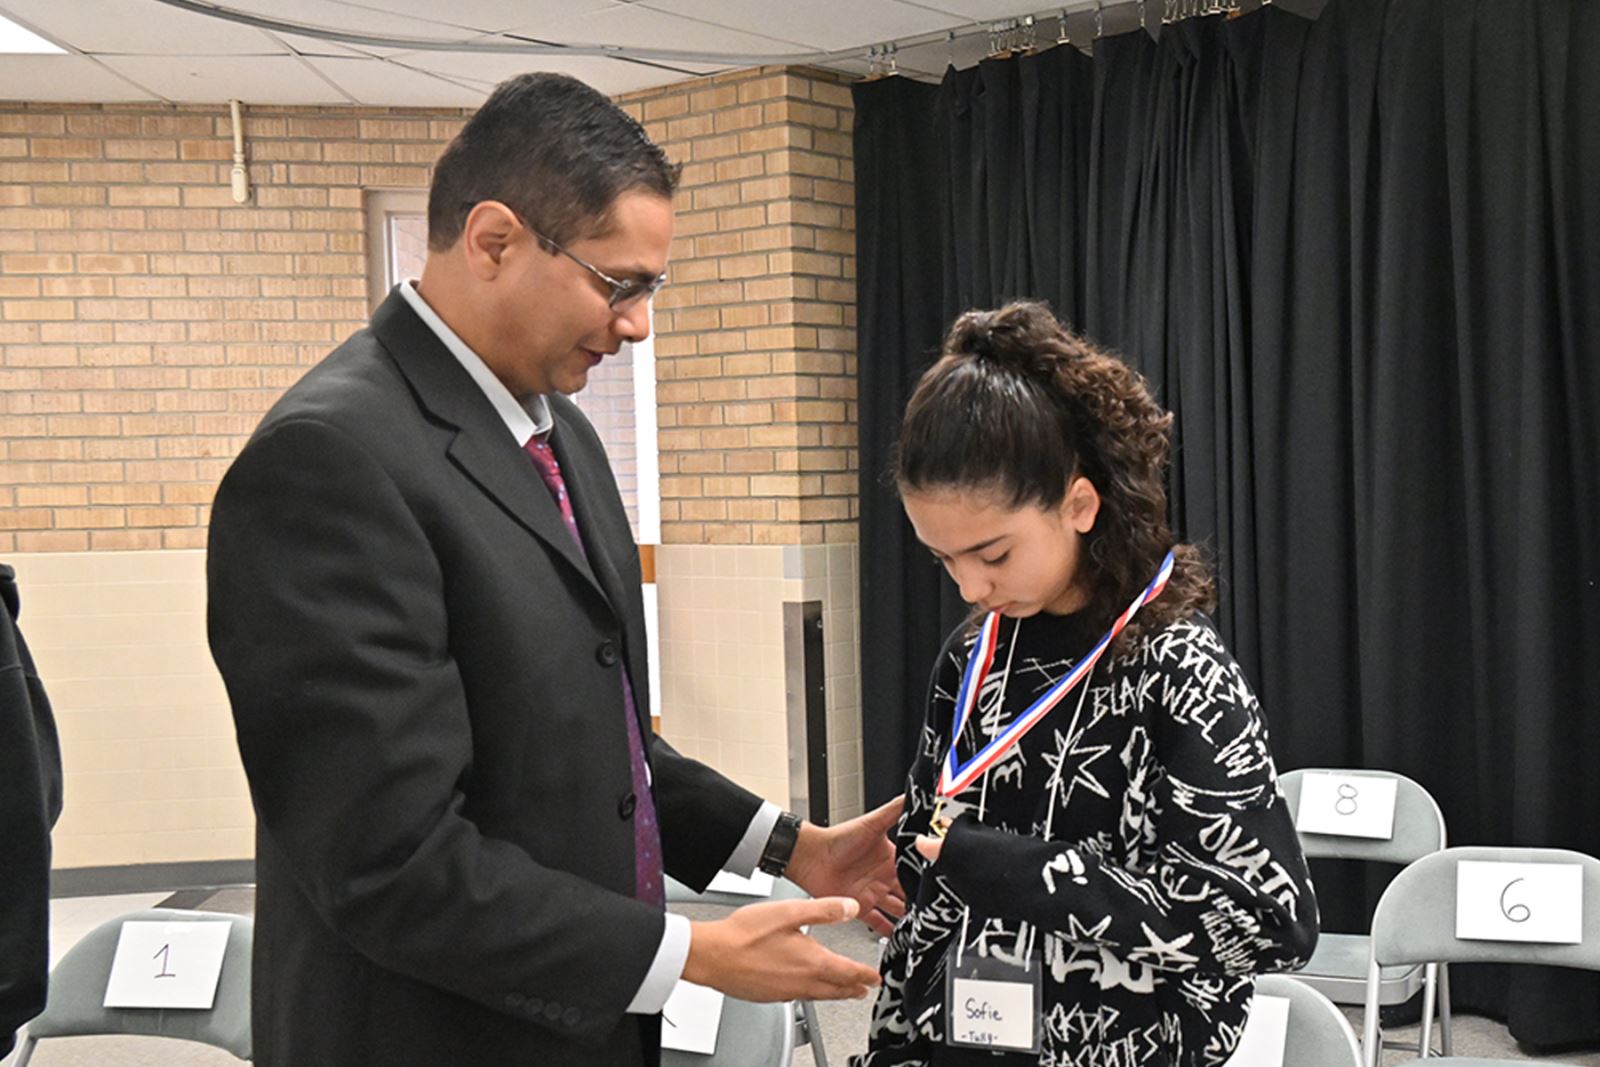 Governing Board member Dr. Ravi Shah places the third place speller's medal around her neck.